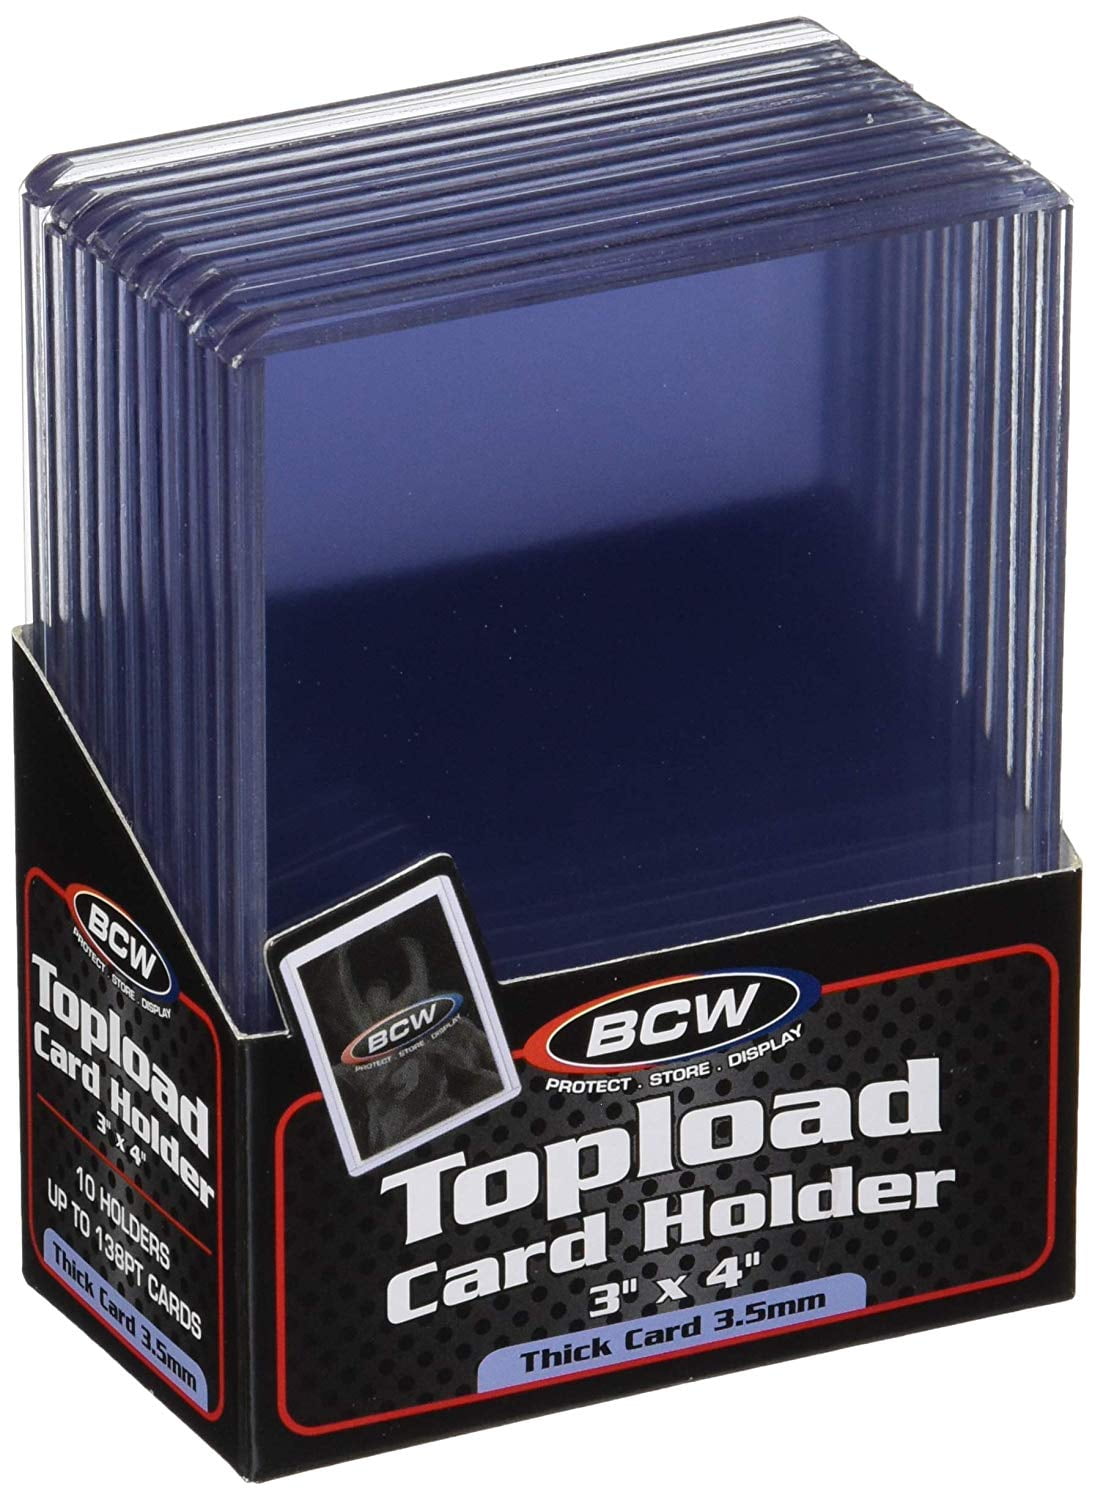 NEW 100 PK BCW 3X5 Top Load Holders Photo Print Index Card Toploaders 